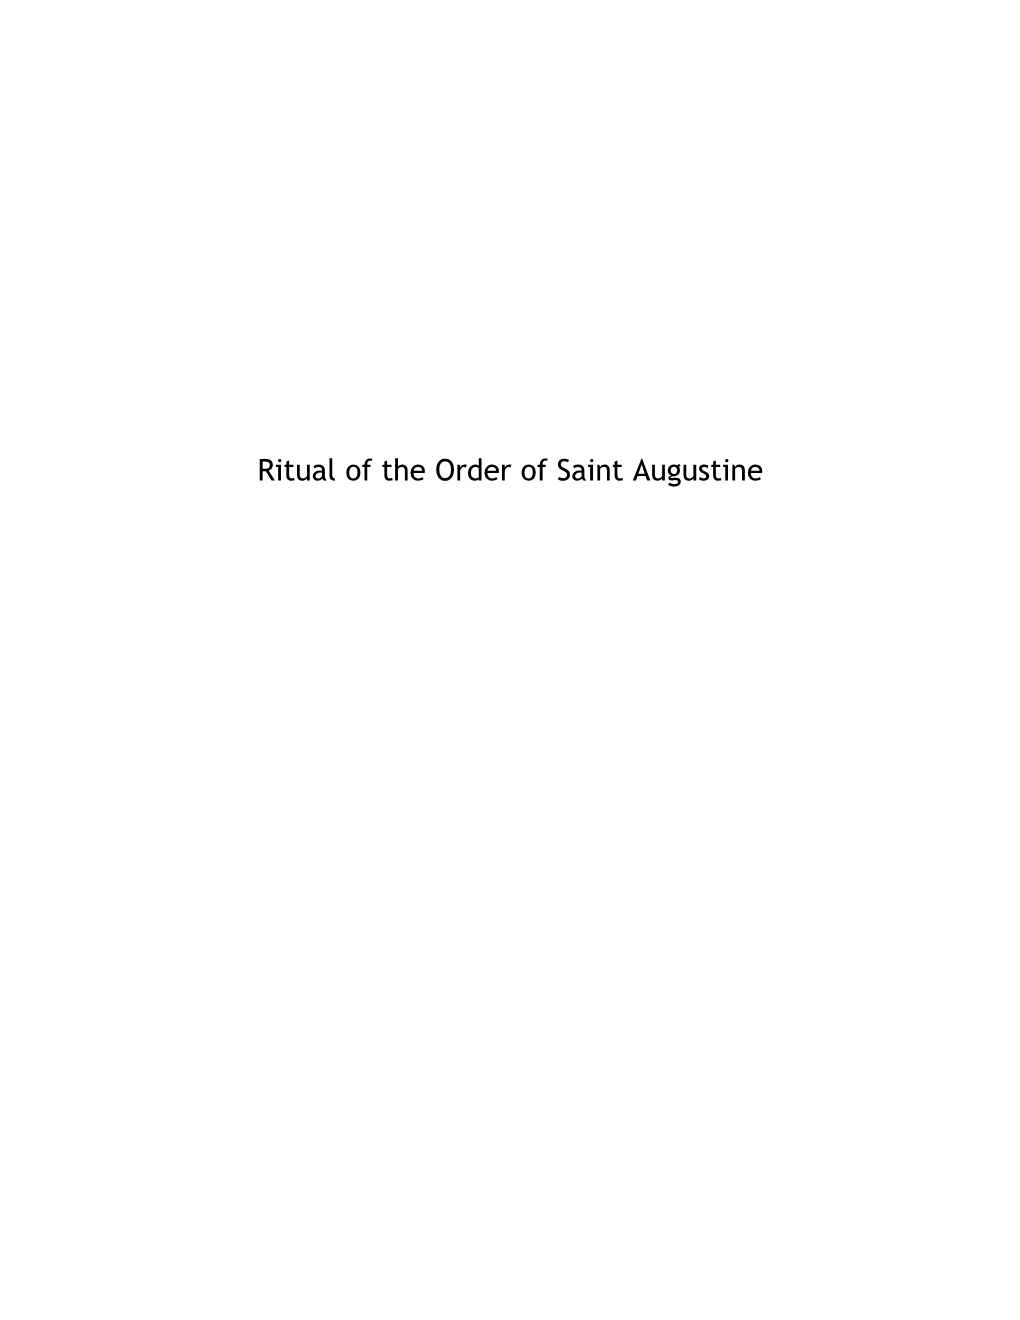 After Having Completed the Revision of the Propers of the Augustinian Order, Sacramentary